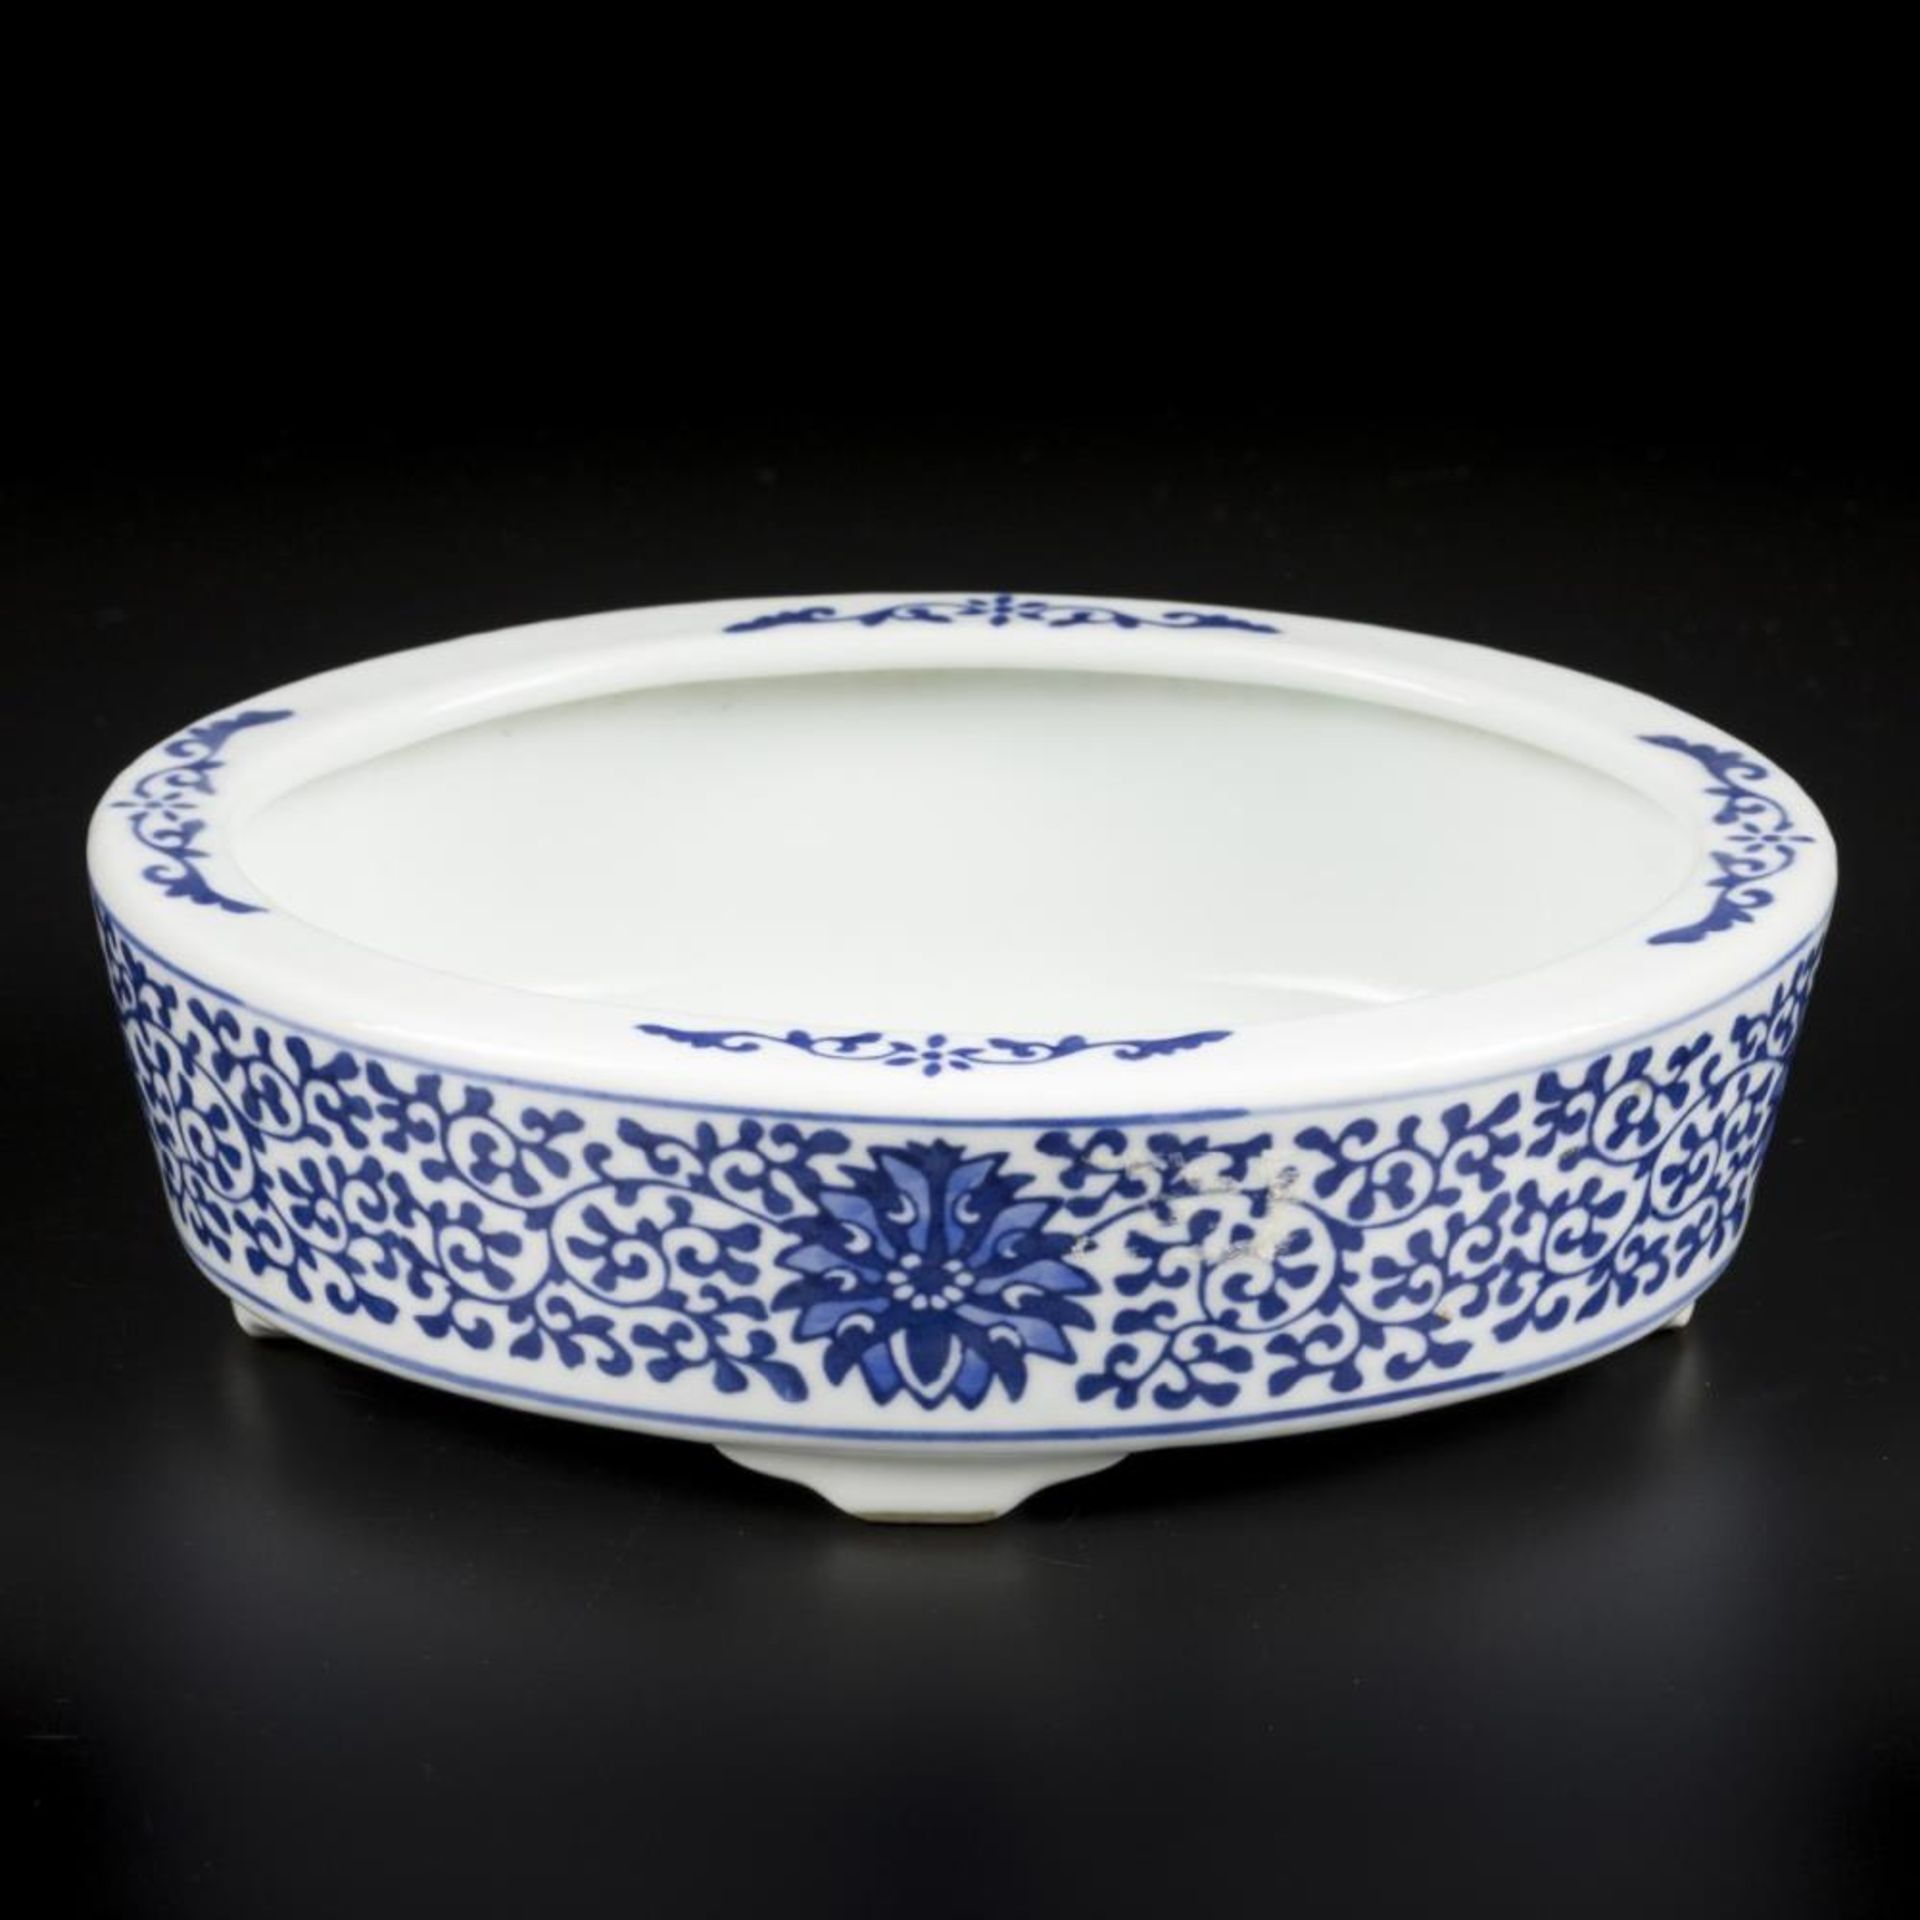 A porcelain jardinière with floral decoration, marked at the bottom " Jingdezhen ". China, 20th cent